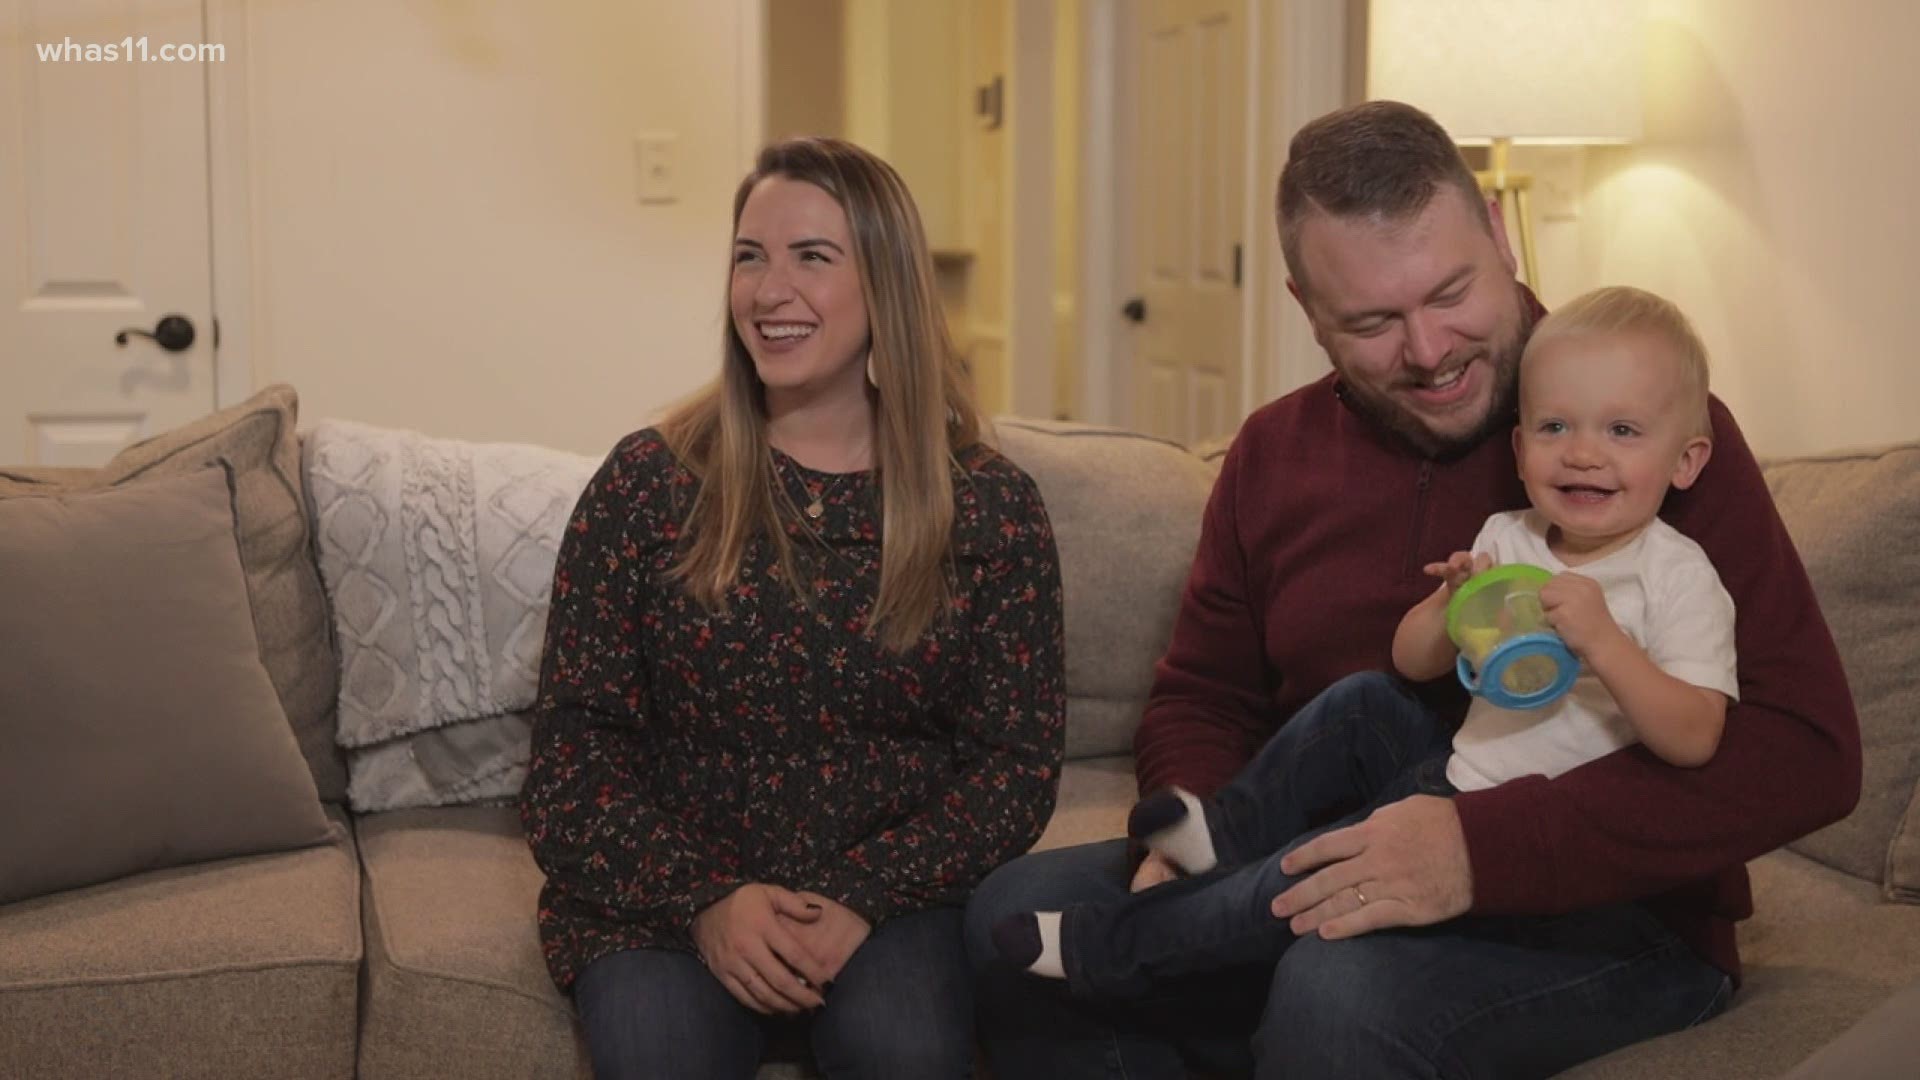 Little Ellis was frozen as an embryo for nearly 20 years. Today, he is one happy couple's "snowflake baby."